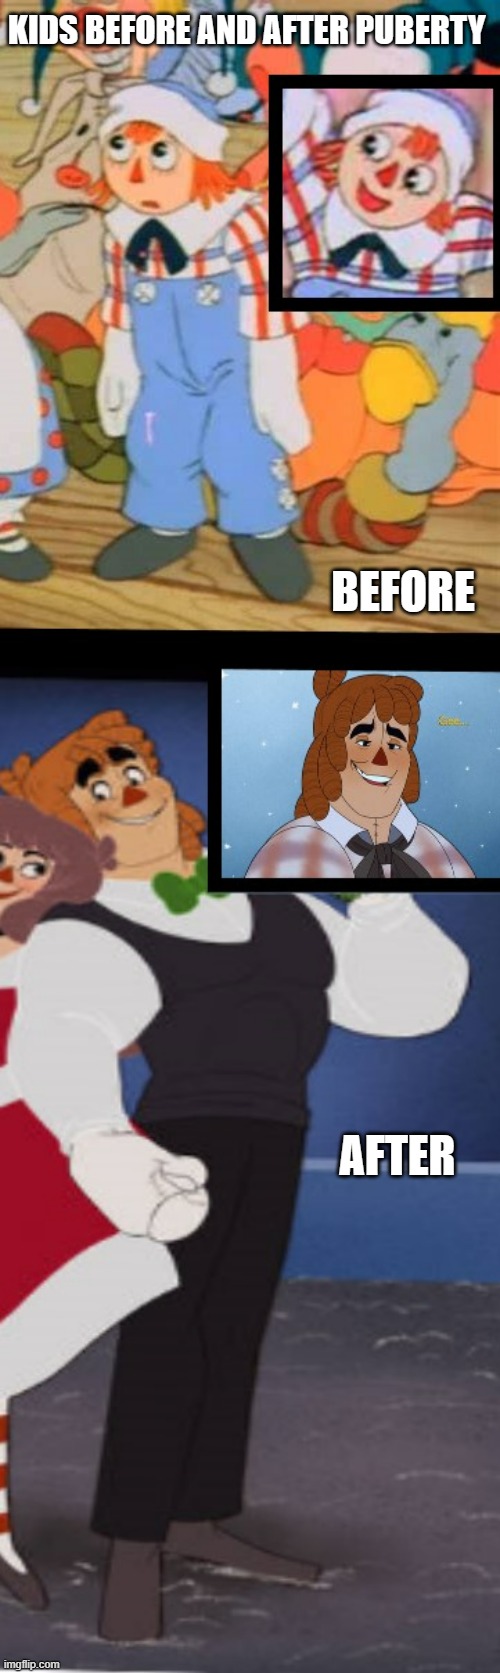 KIDS BEFORE AND AFTER PUBERTY: ANDY EDITION | KIDS BEFORE AND AFTER PUBERTY; BEFORE; AFTER | image tagged in disney,cartoon,musical,annabelle,andy,giga chad | made w/ Imgflip meme maker